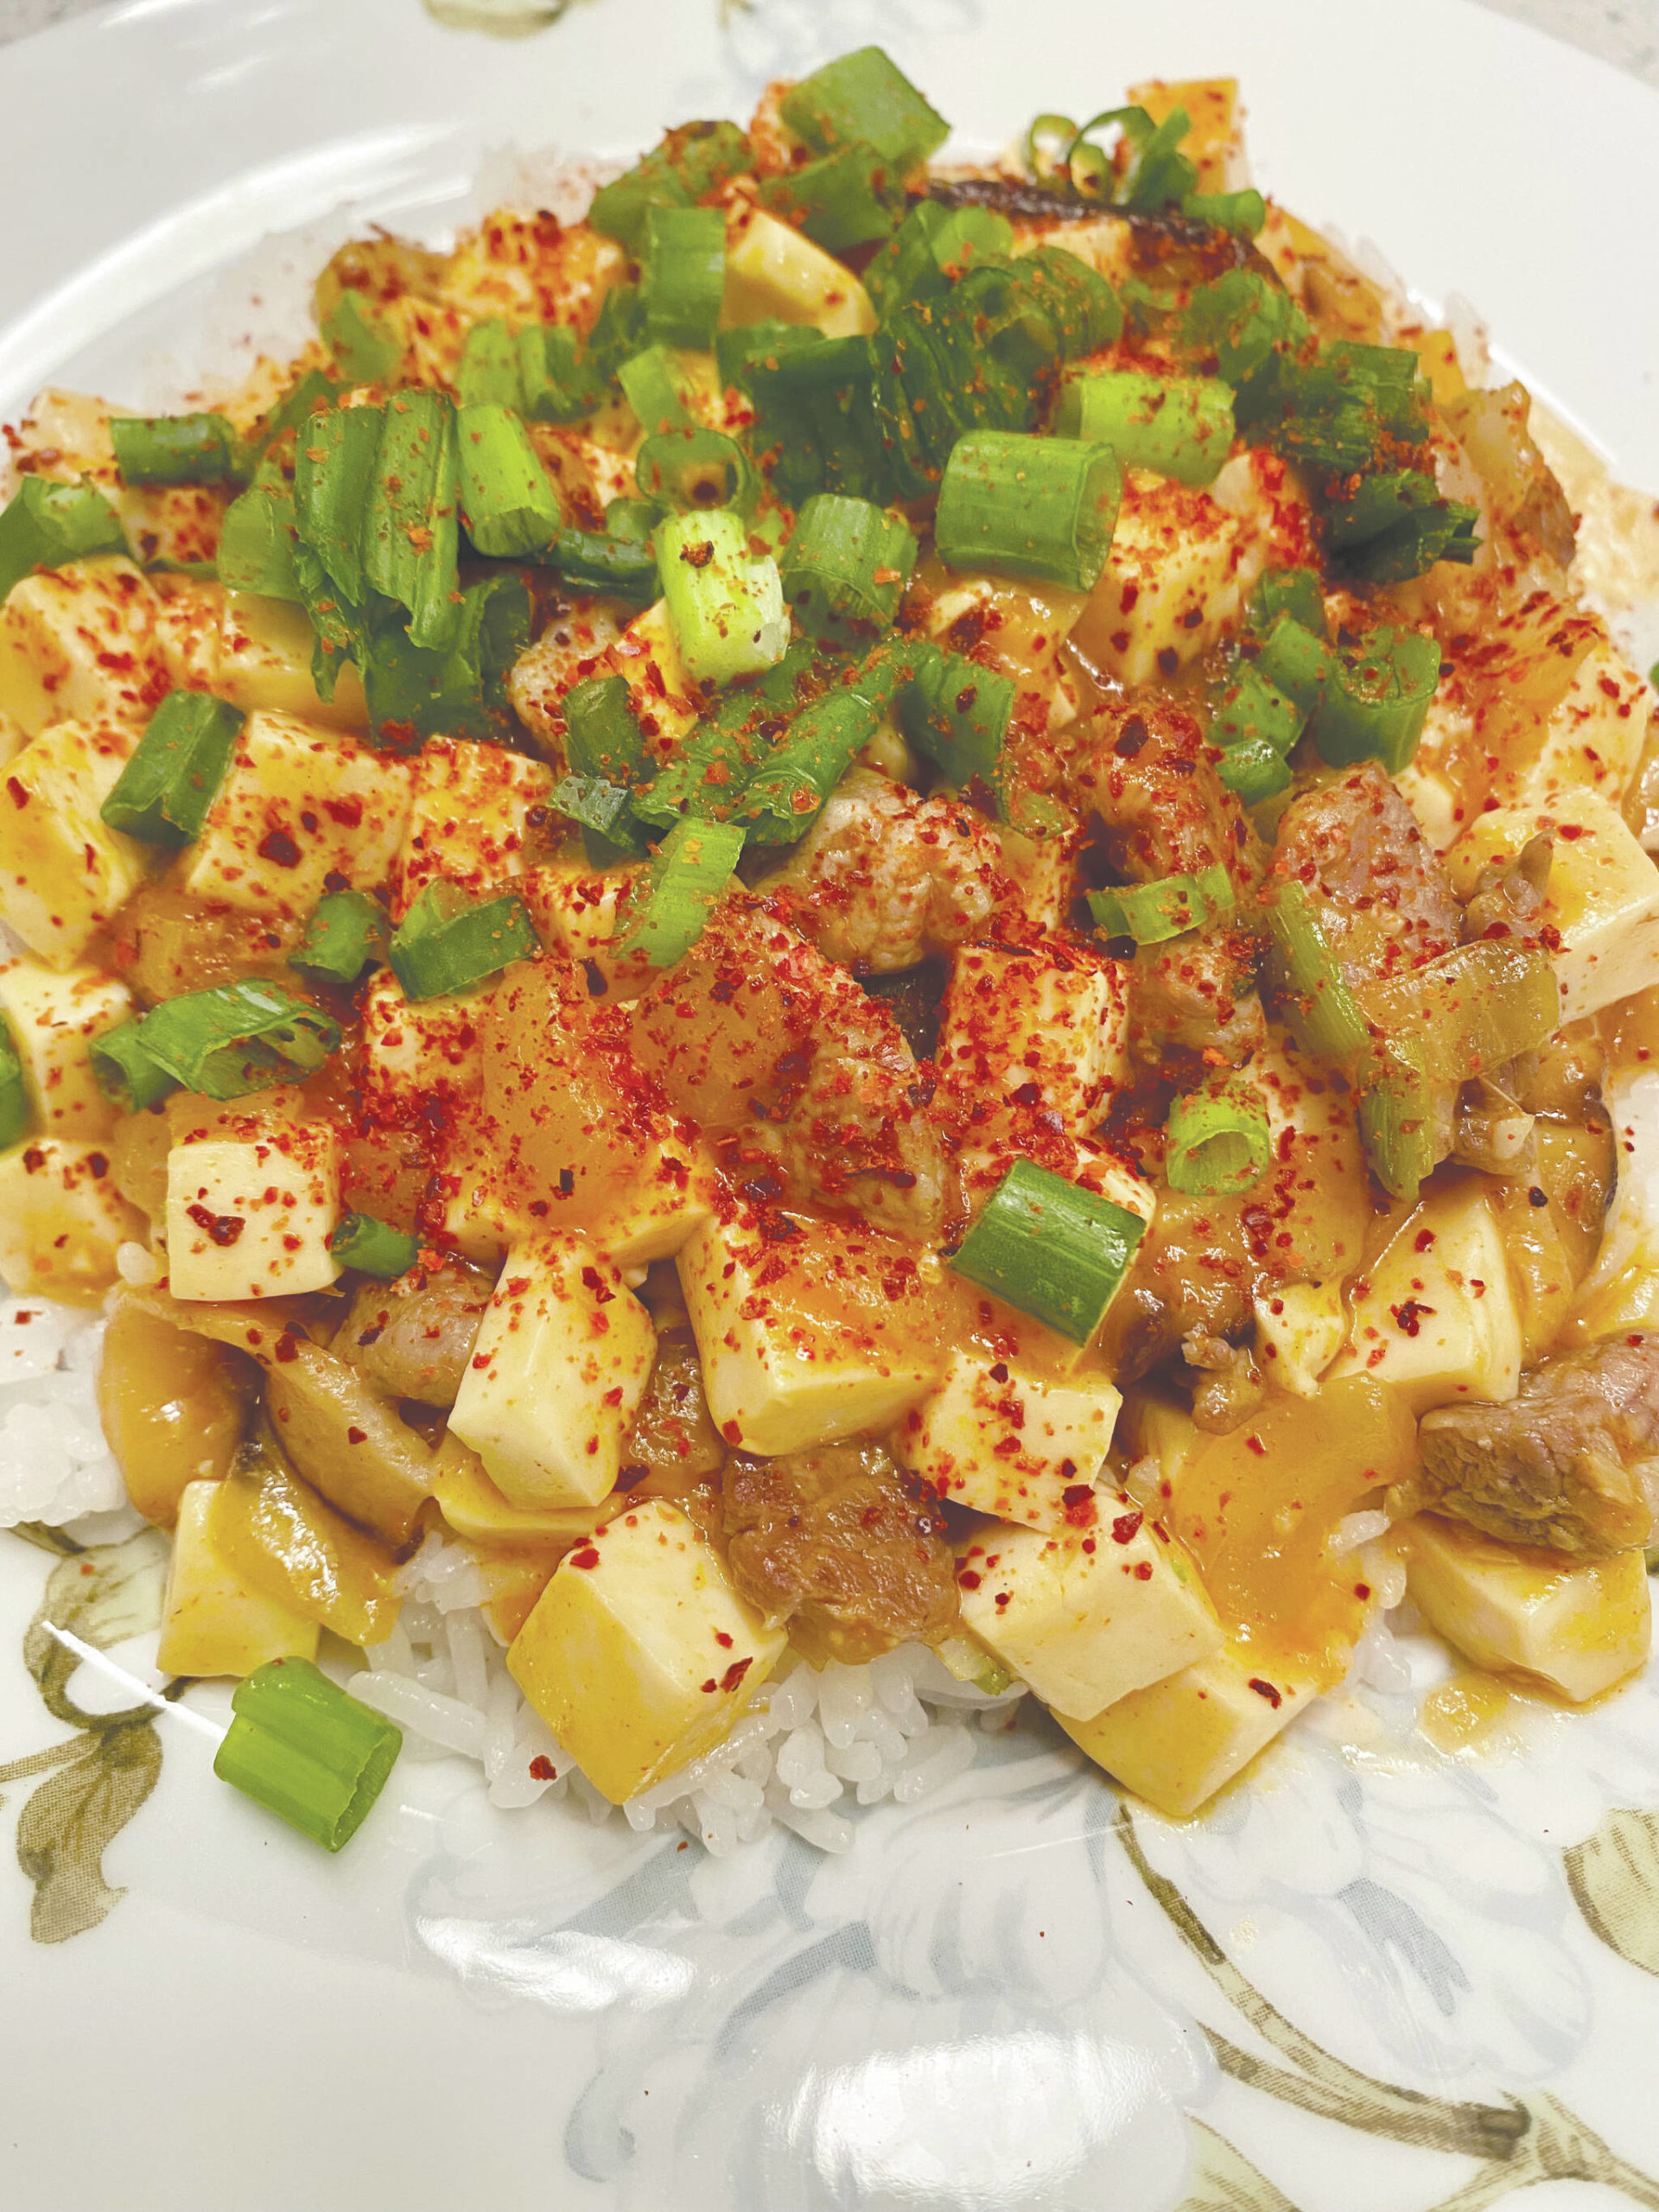 Photo by Tressa Dale/Peninsula Clarion 
Korean red pepper paste adds heat to this Mapo tofu recipe.